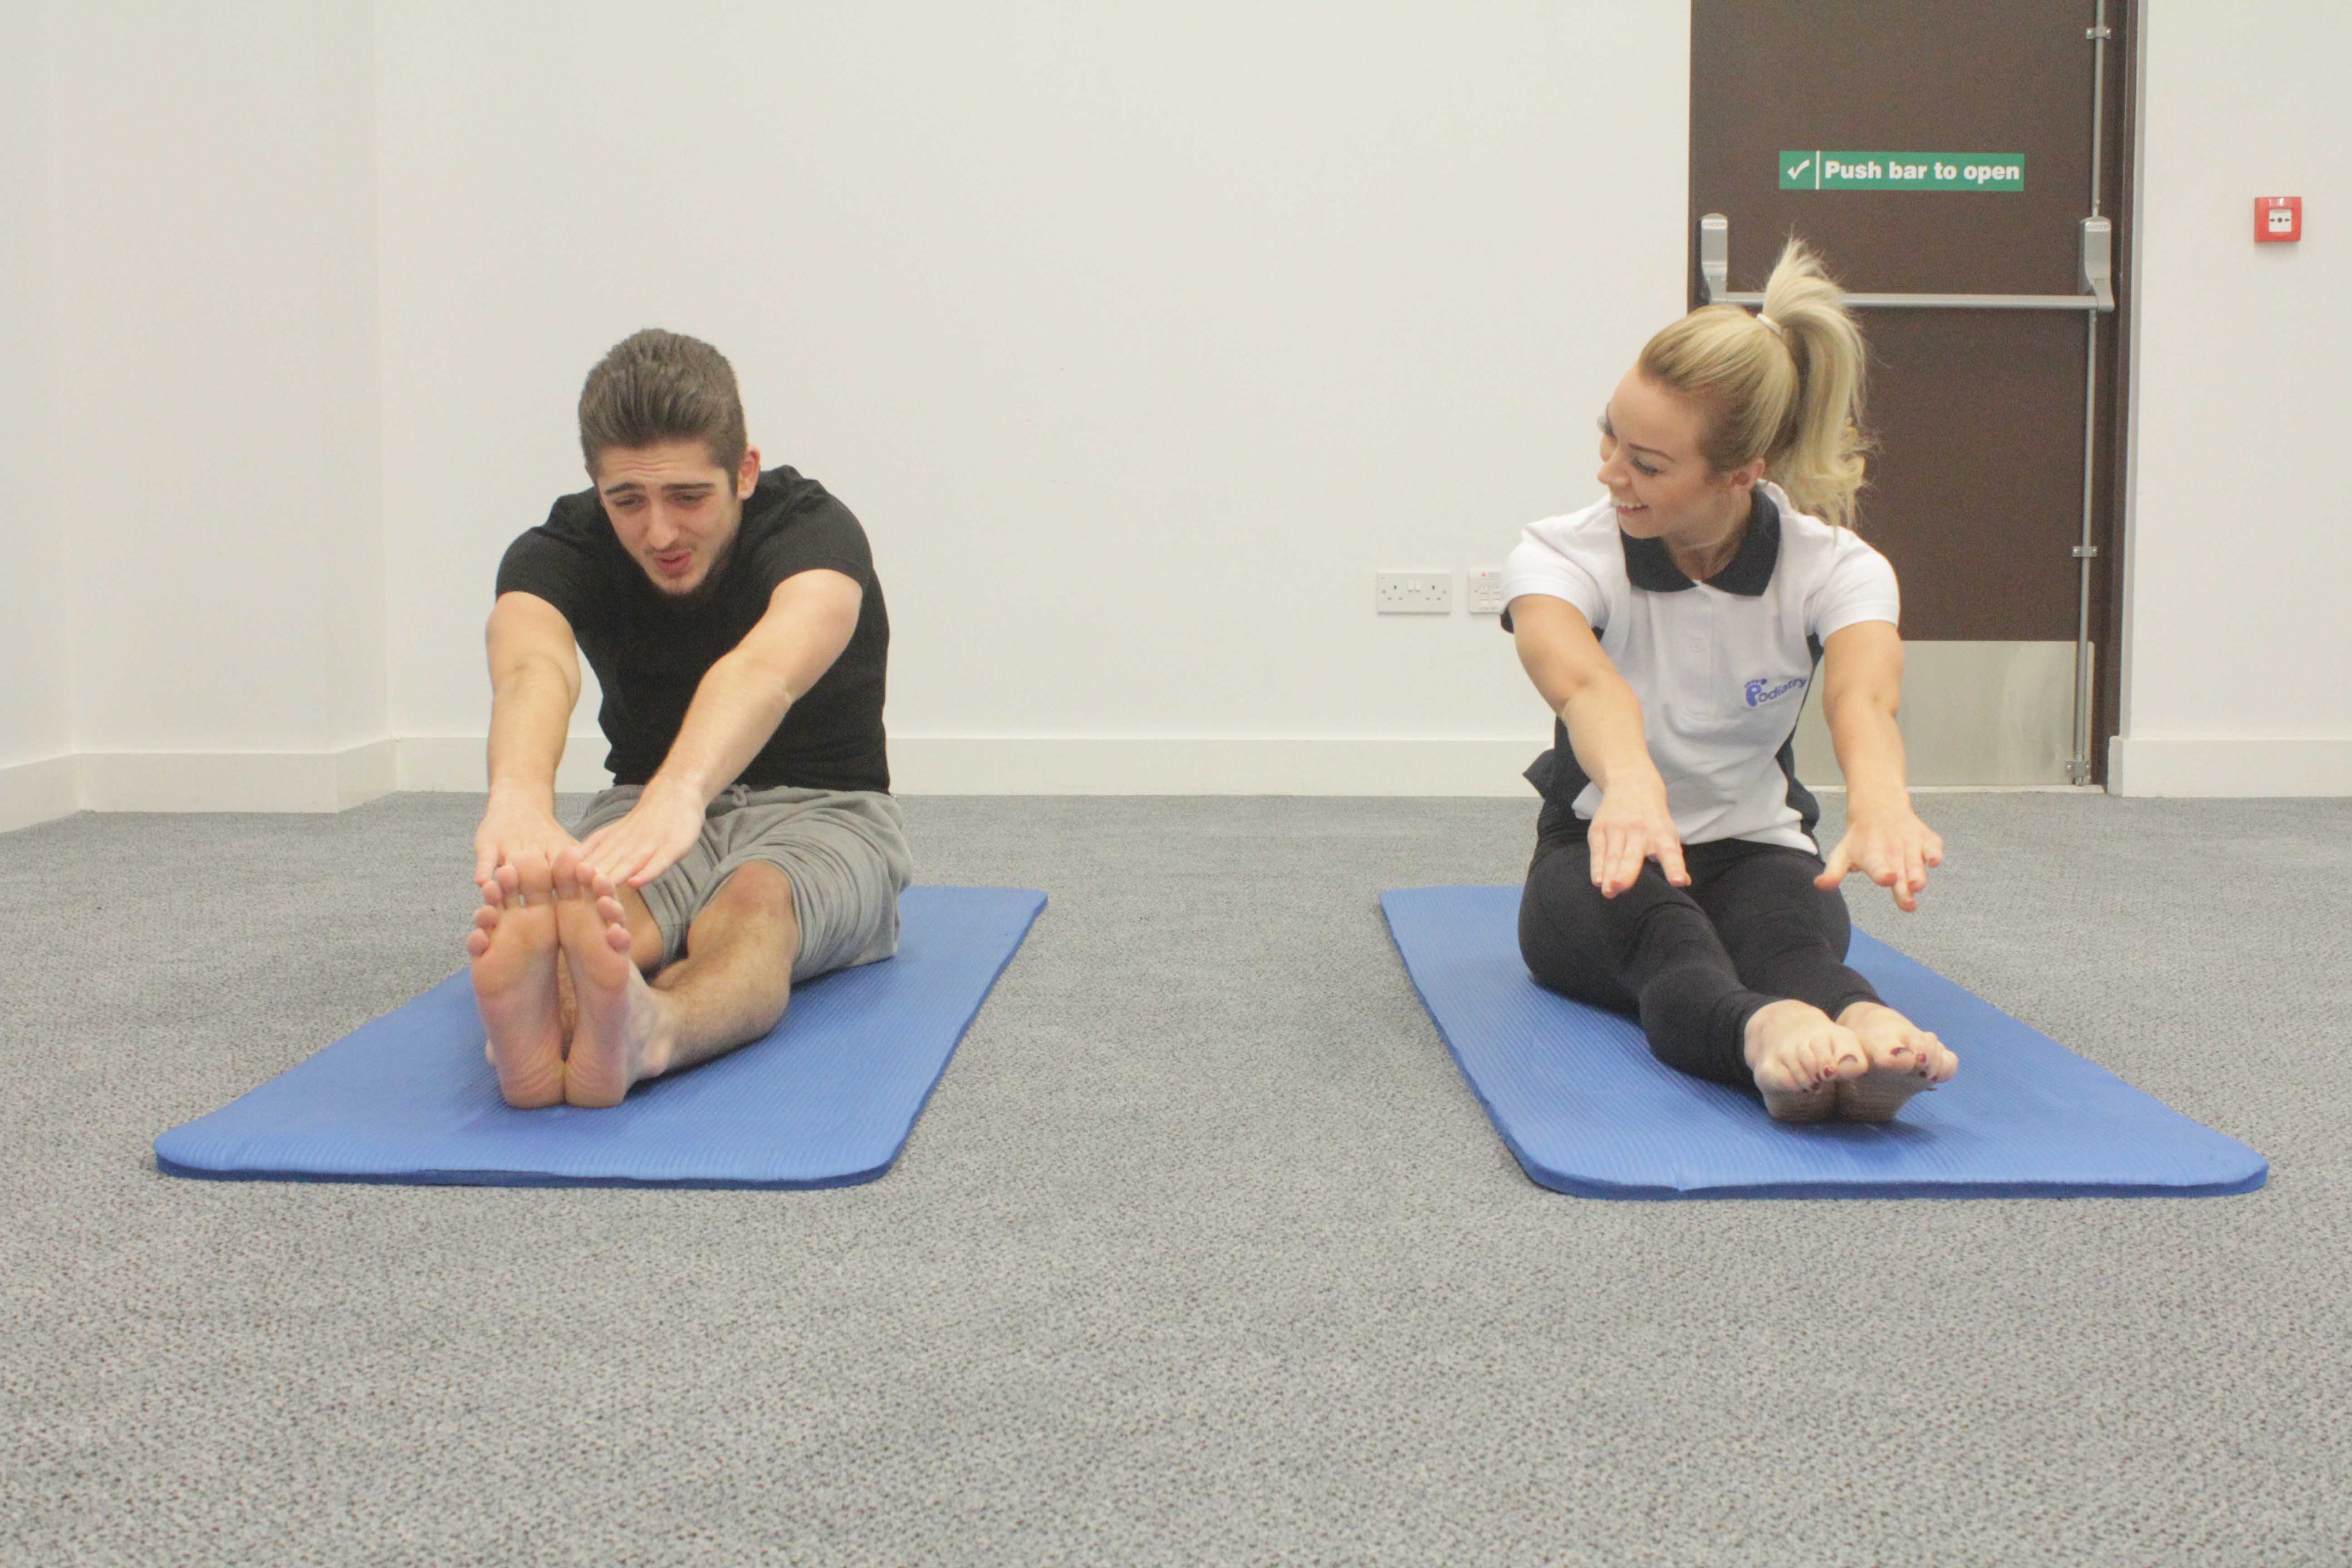 Stetch exercises using a resistance band, guided by a specialist paediatric physiotherapist